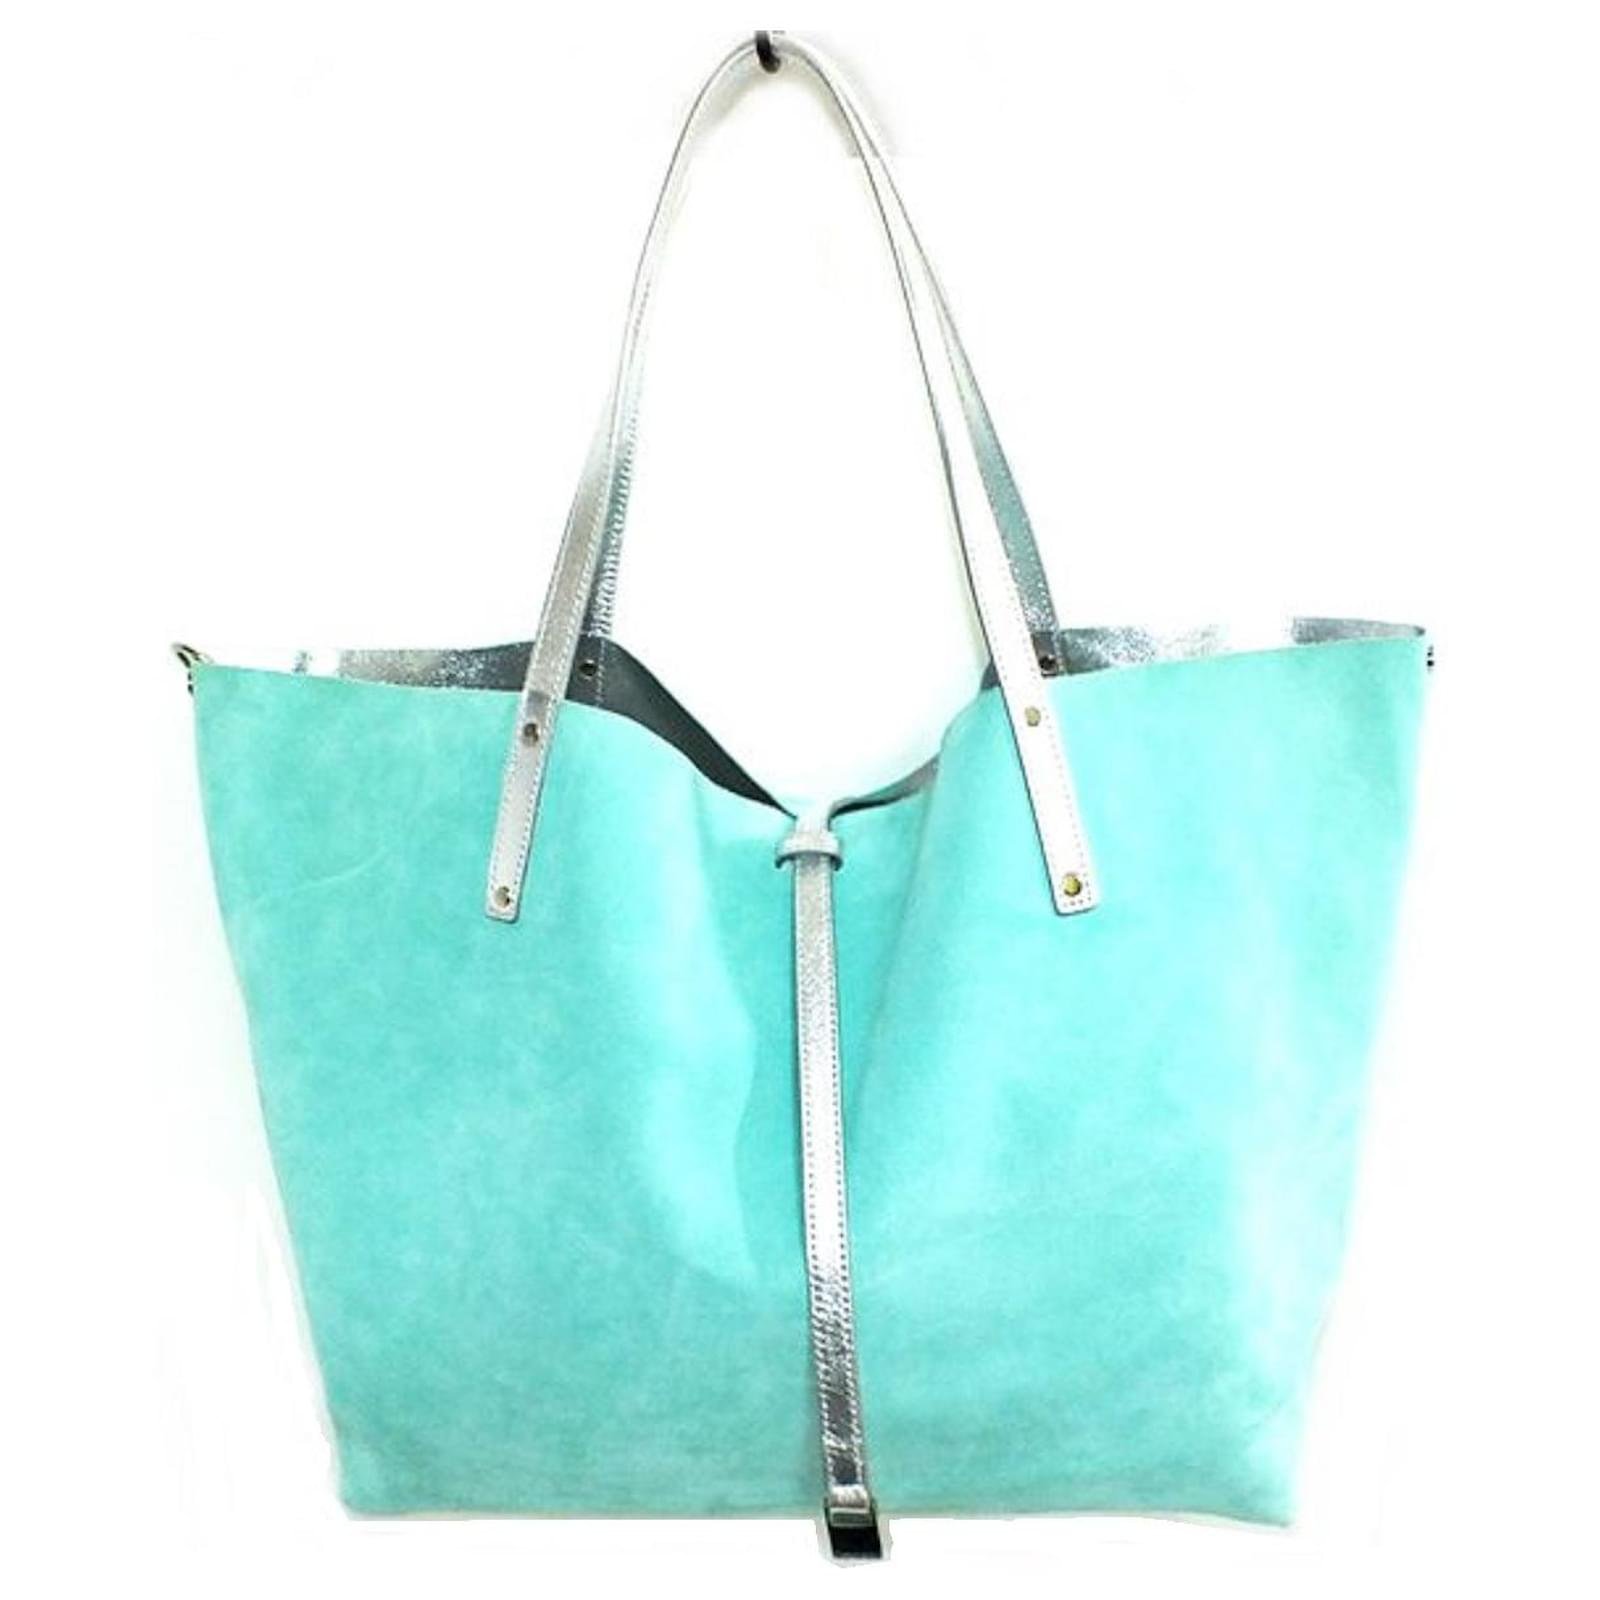 Tiffany & Co Reversible Tote Bag in TurquoiseSilver.jpg